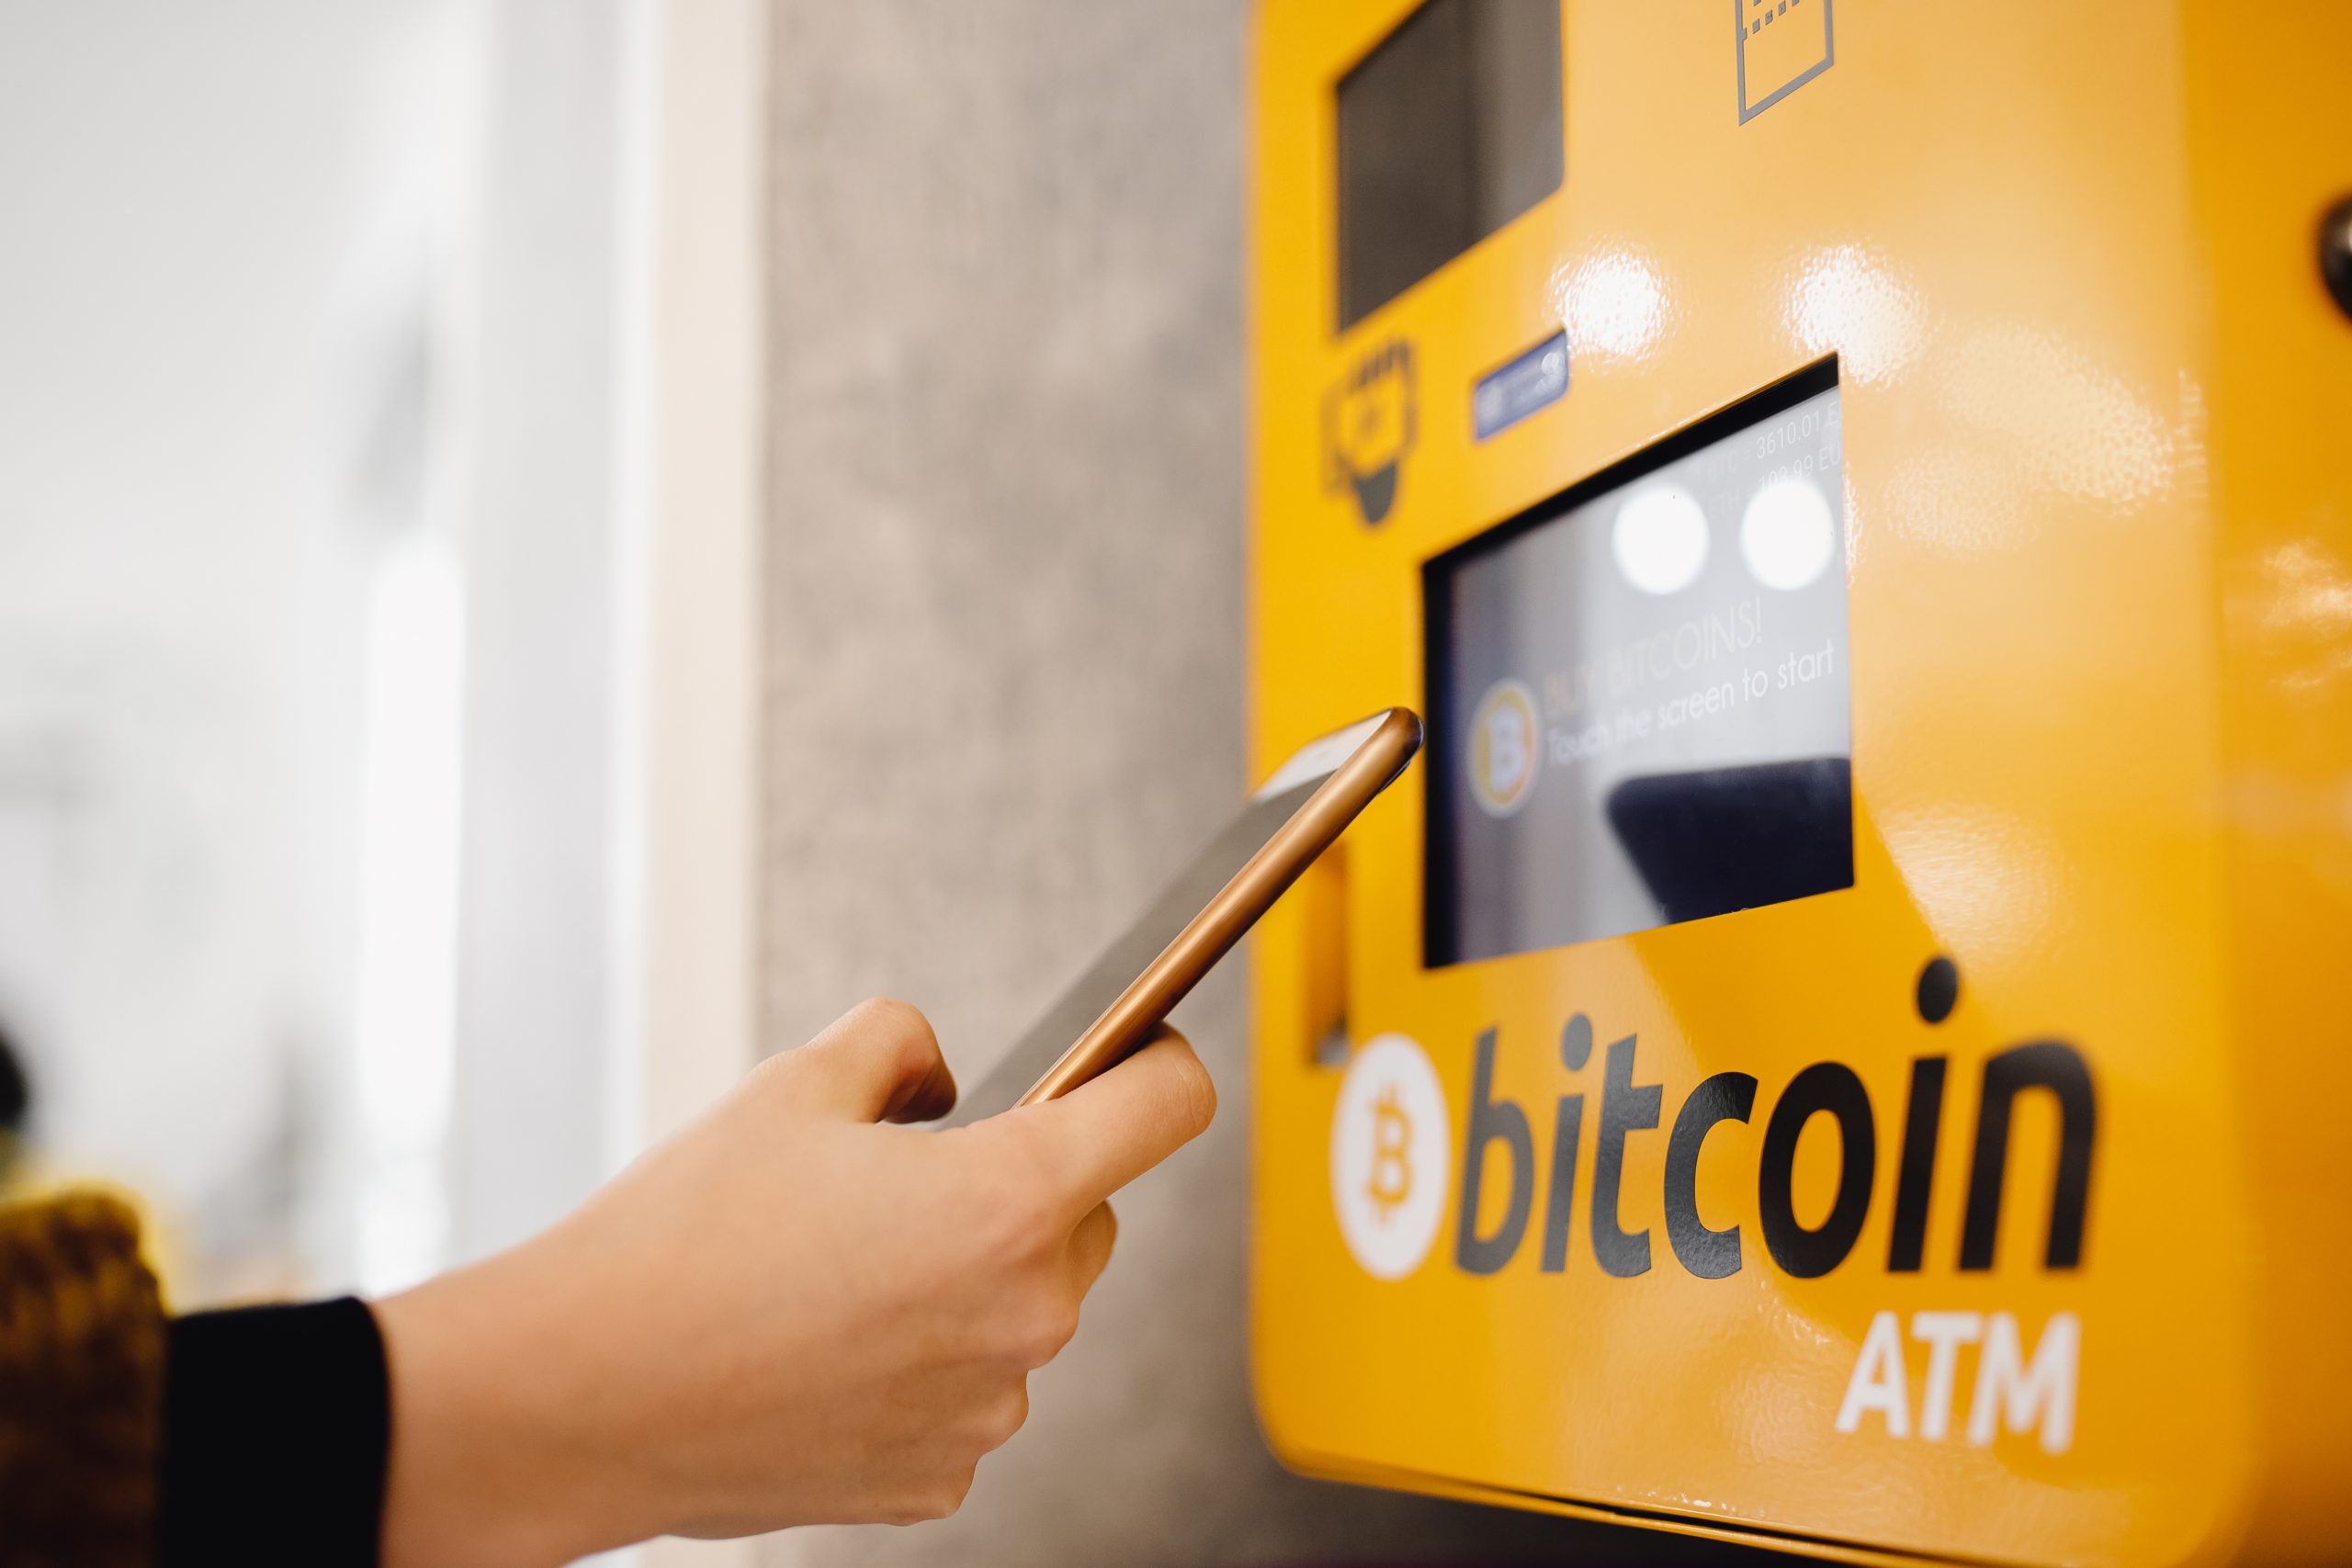 UK orders closing of all cryptocurrency ATMs in the country